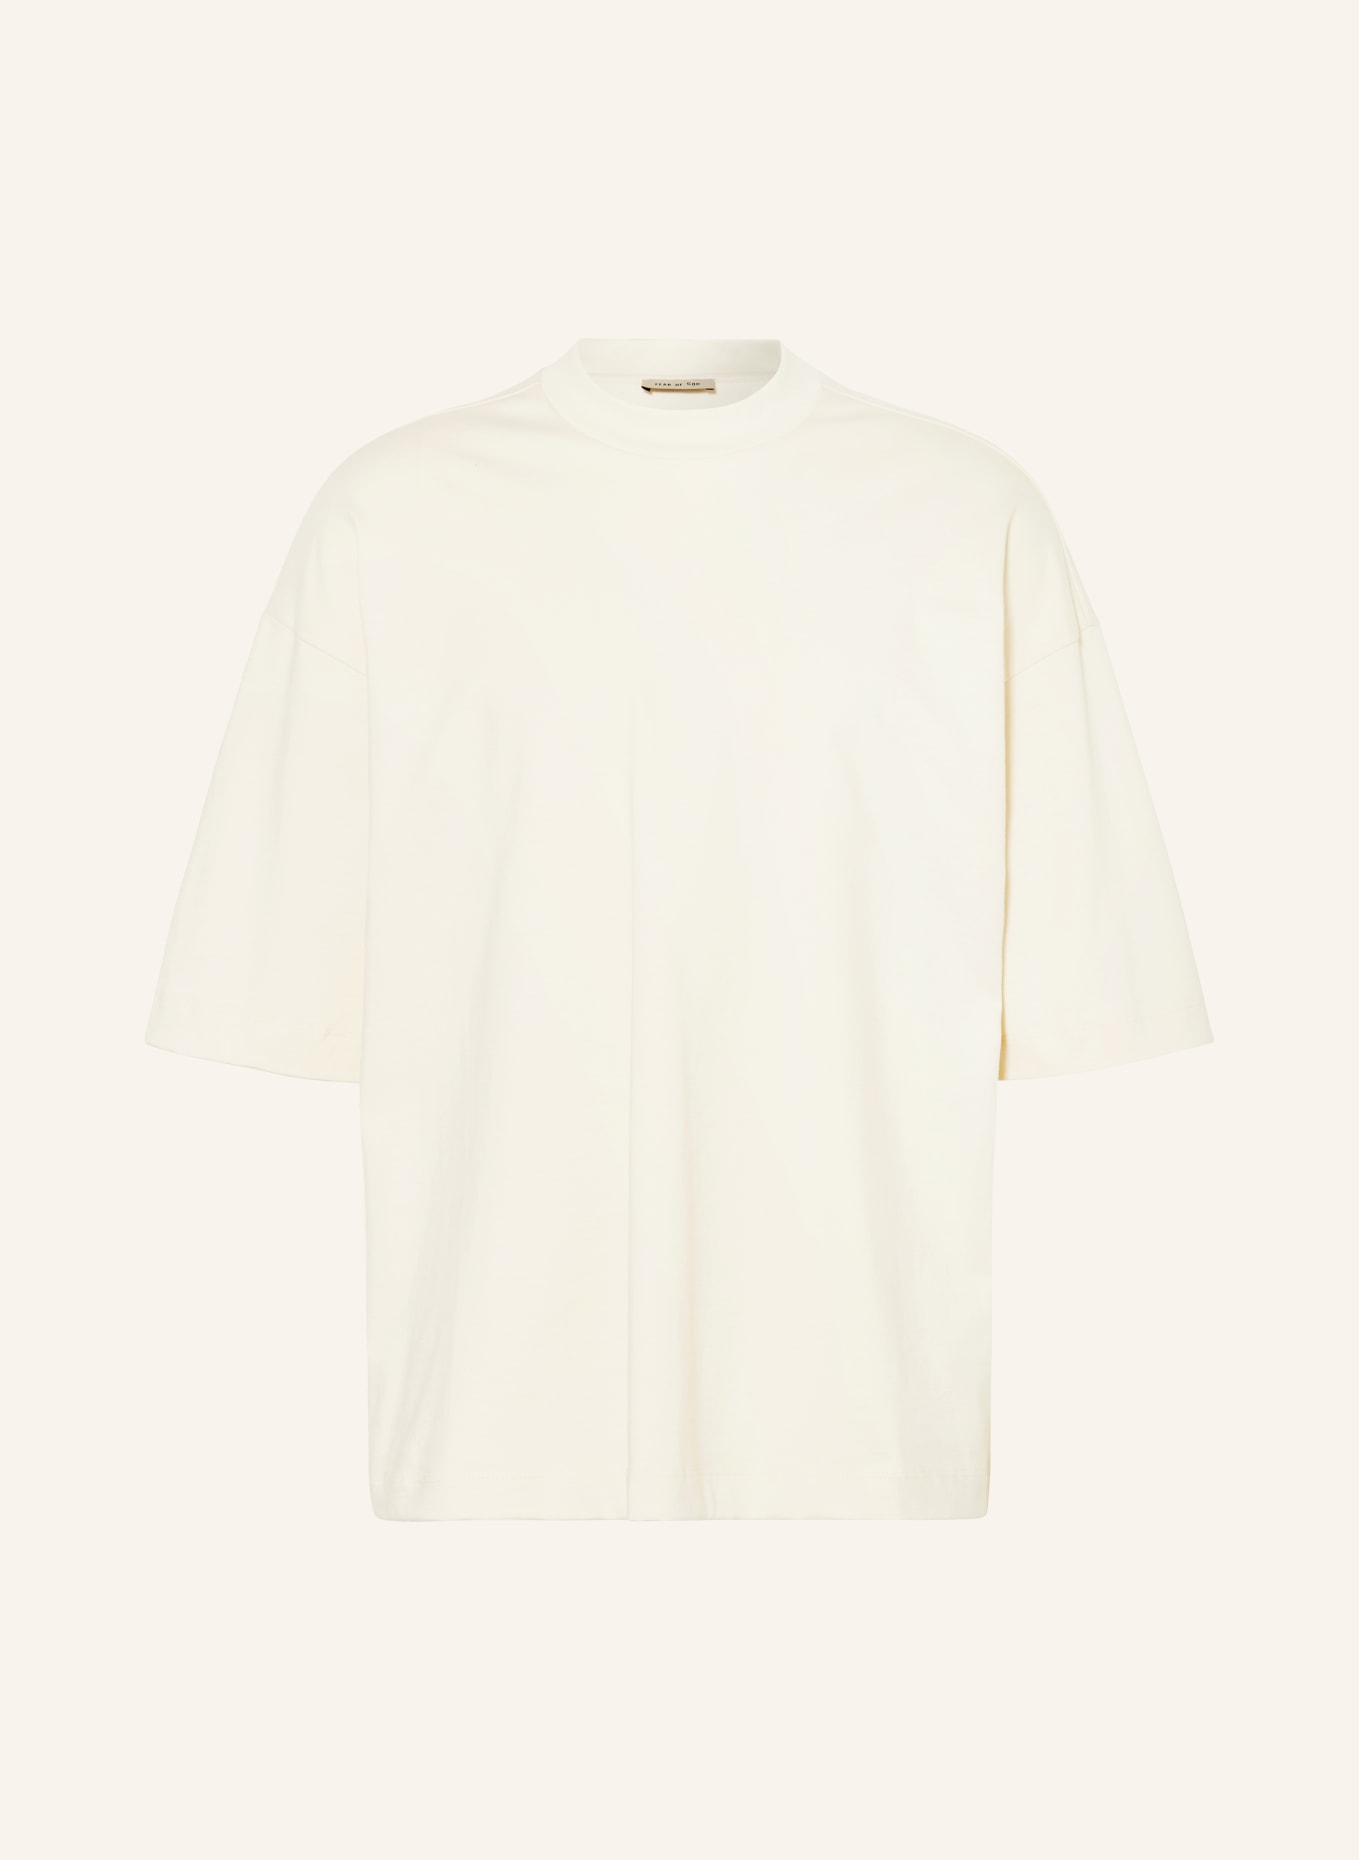 FEAR OF GOD T-shirt, Color: CREAM (Image 1)